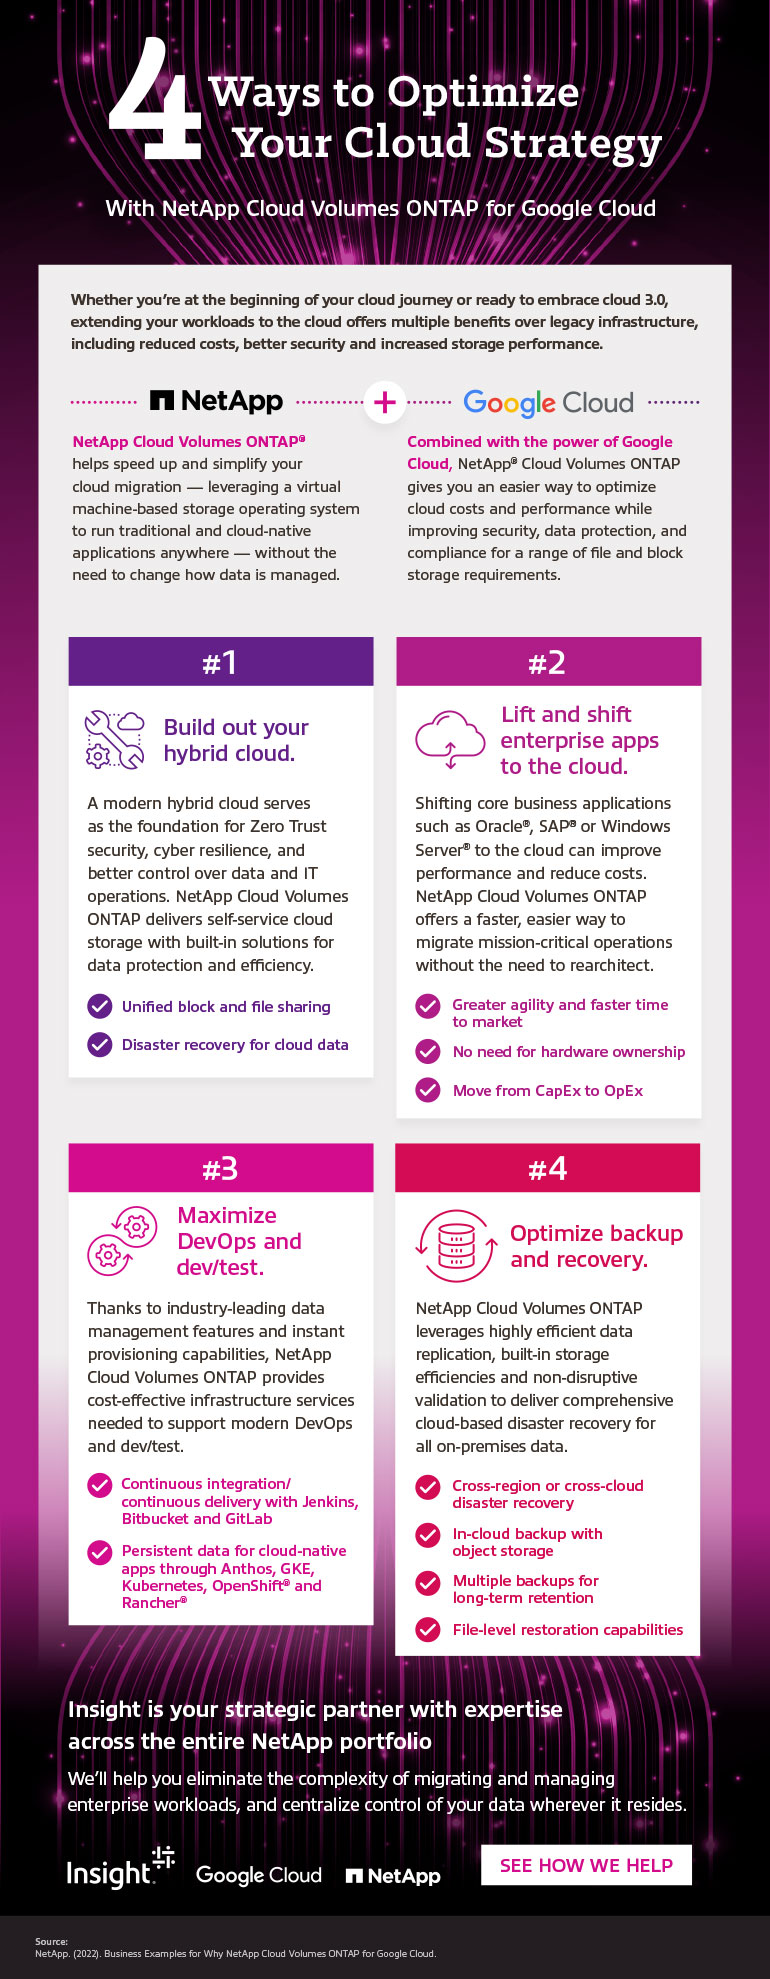 4 Ways to Optimize Your Cloud Strategy infographic